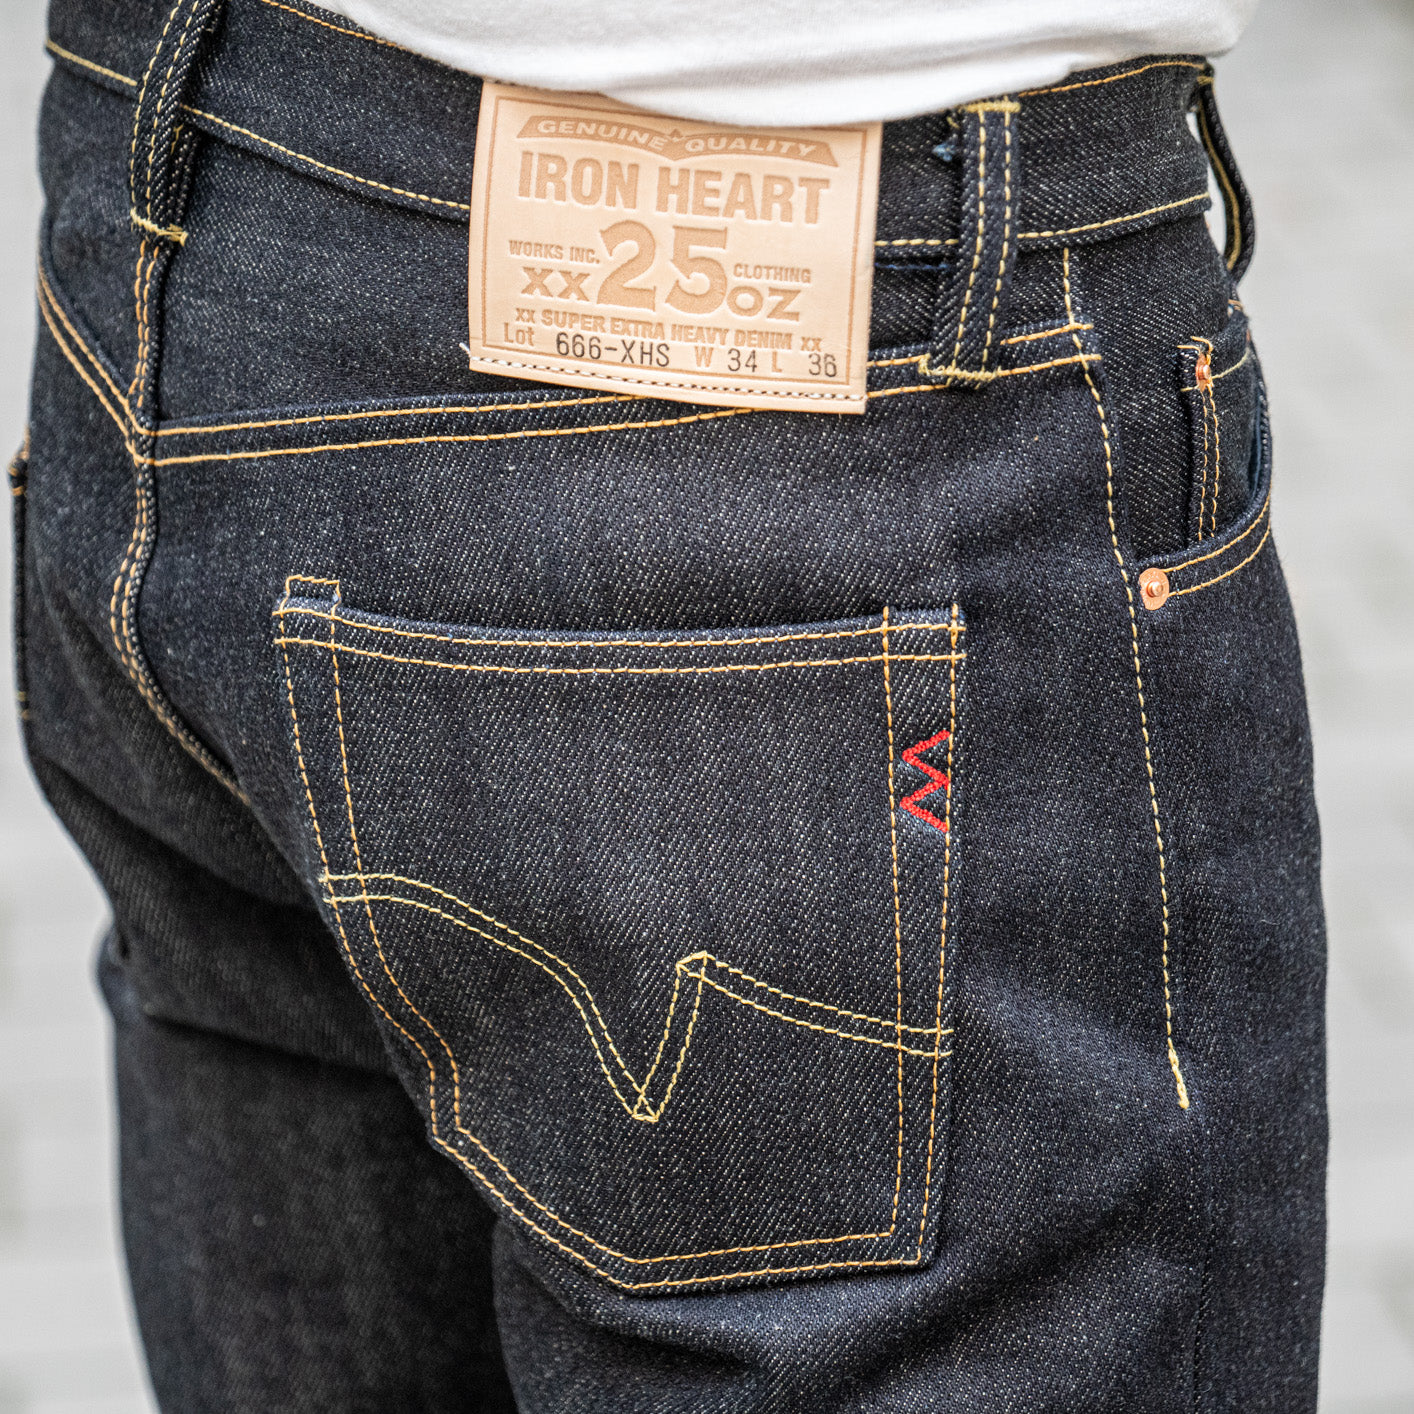 A Beginner's Guide to Raw Denim